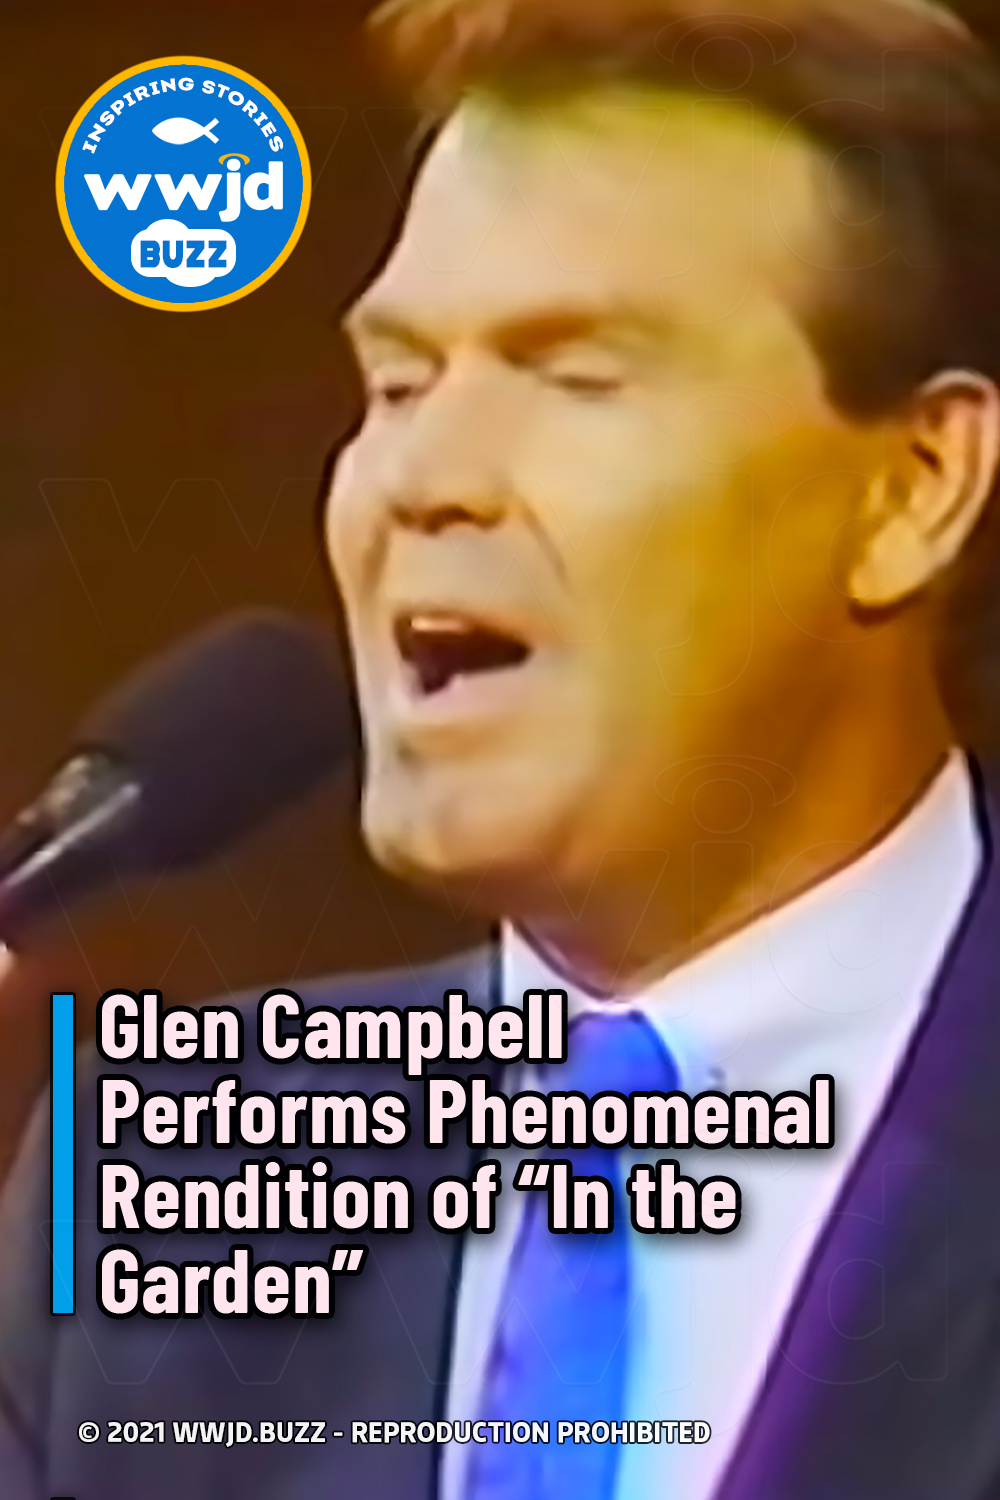 Glen Campbell Performs Phenomenal Rendition of “In the Garden”